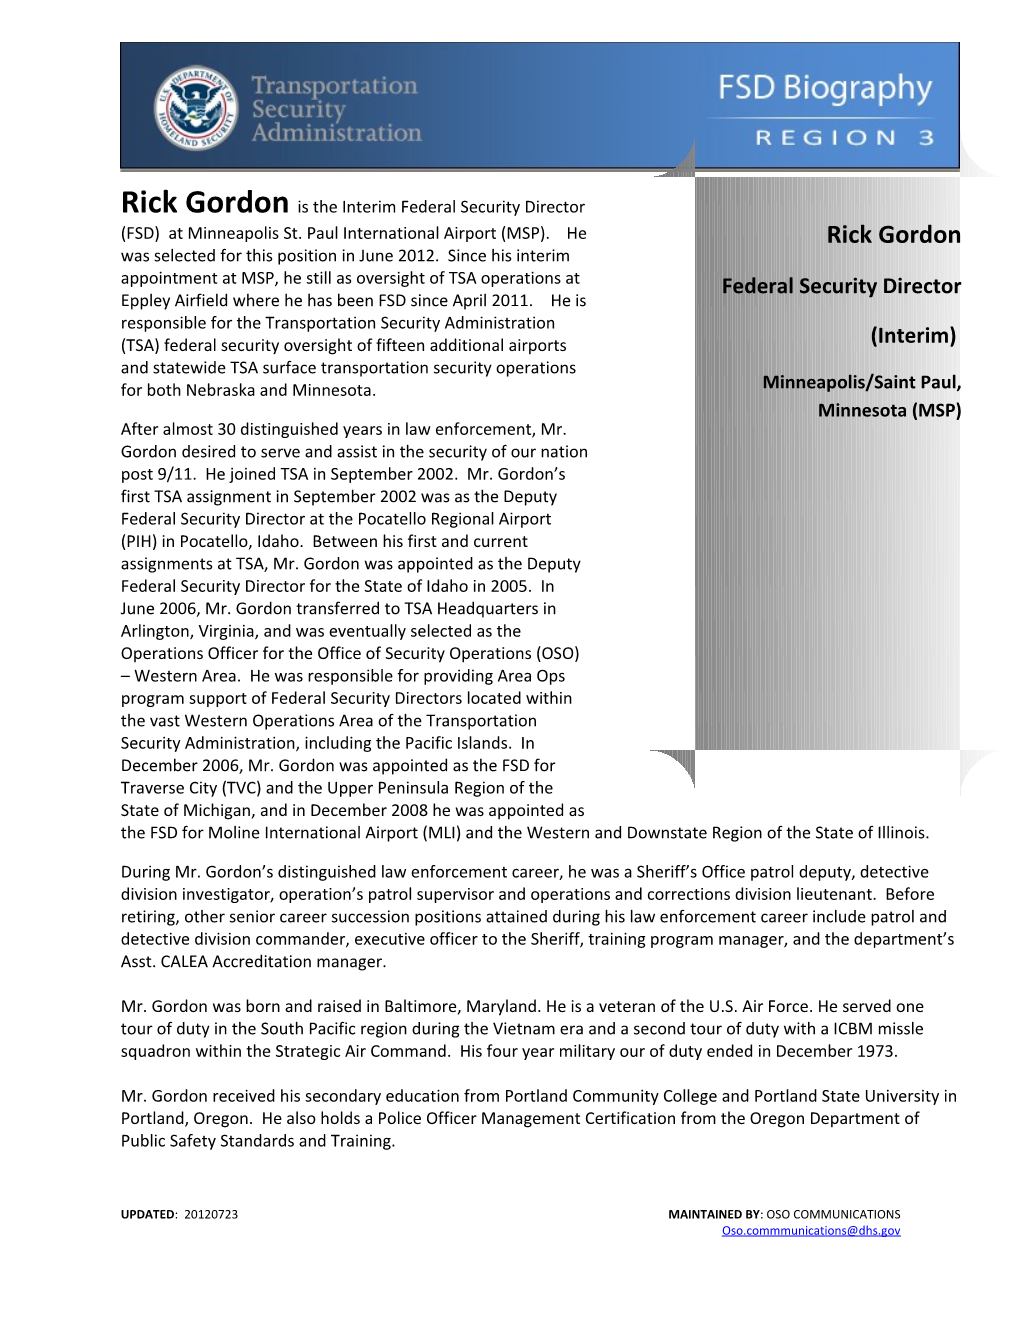 Rick Gordon Joined the Transportation Security Administration in September 2002, After